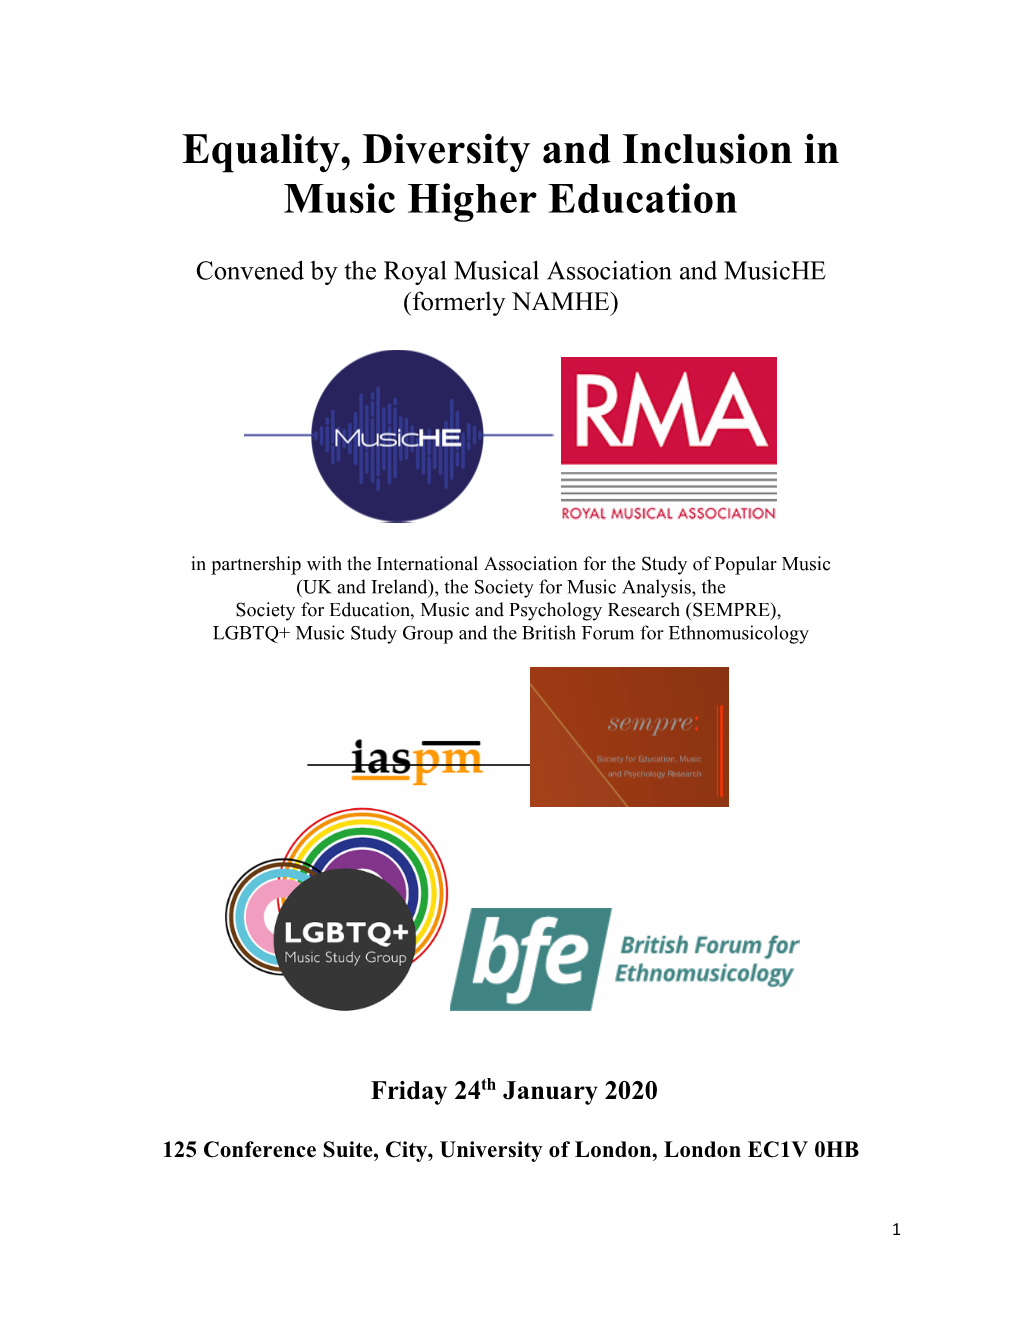 Equality, Diversity and Inclusion in Music Higher Education